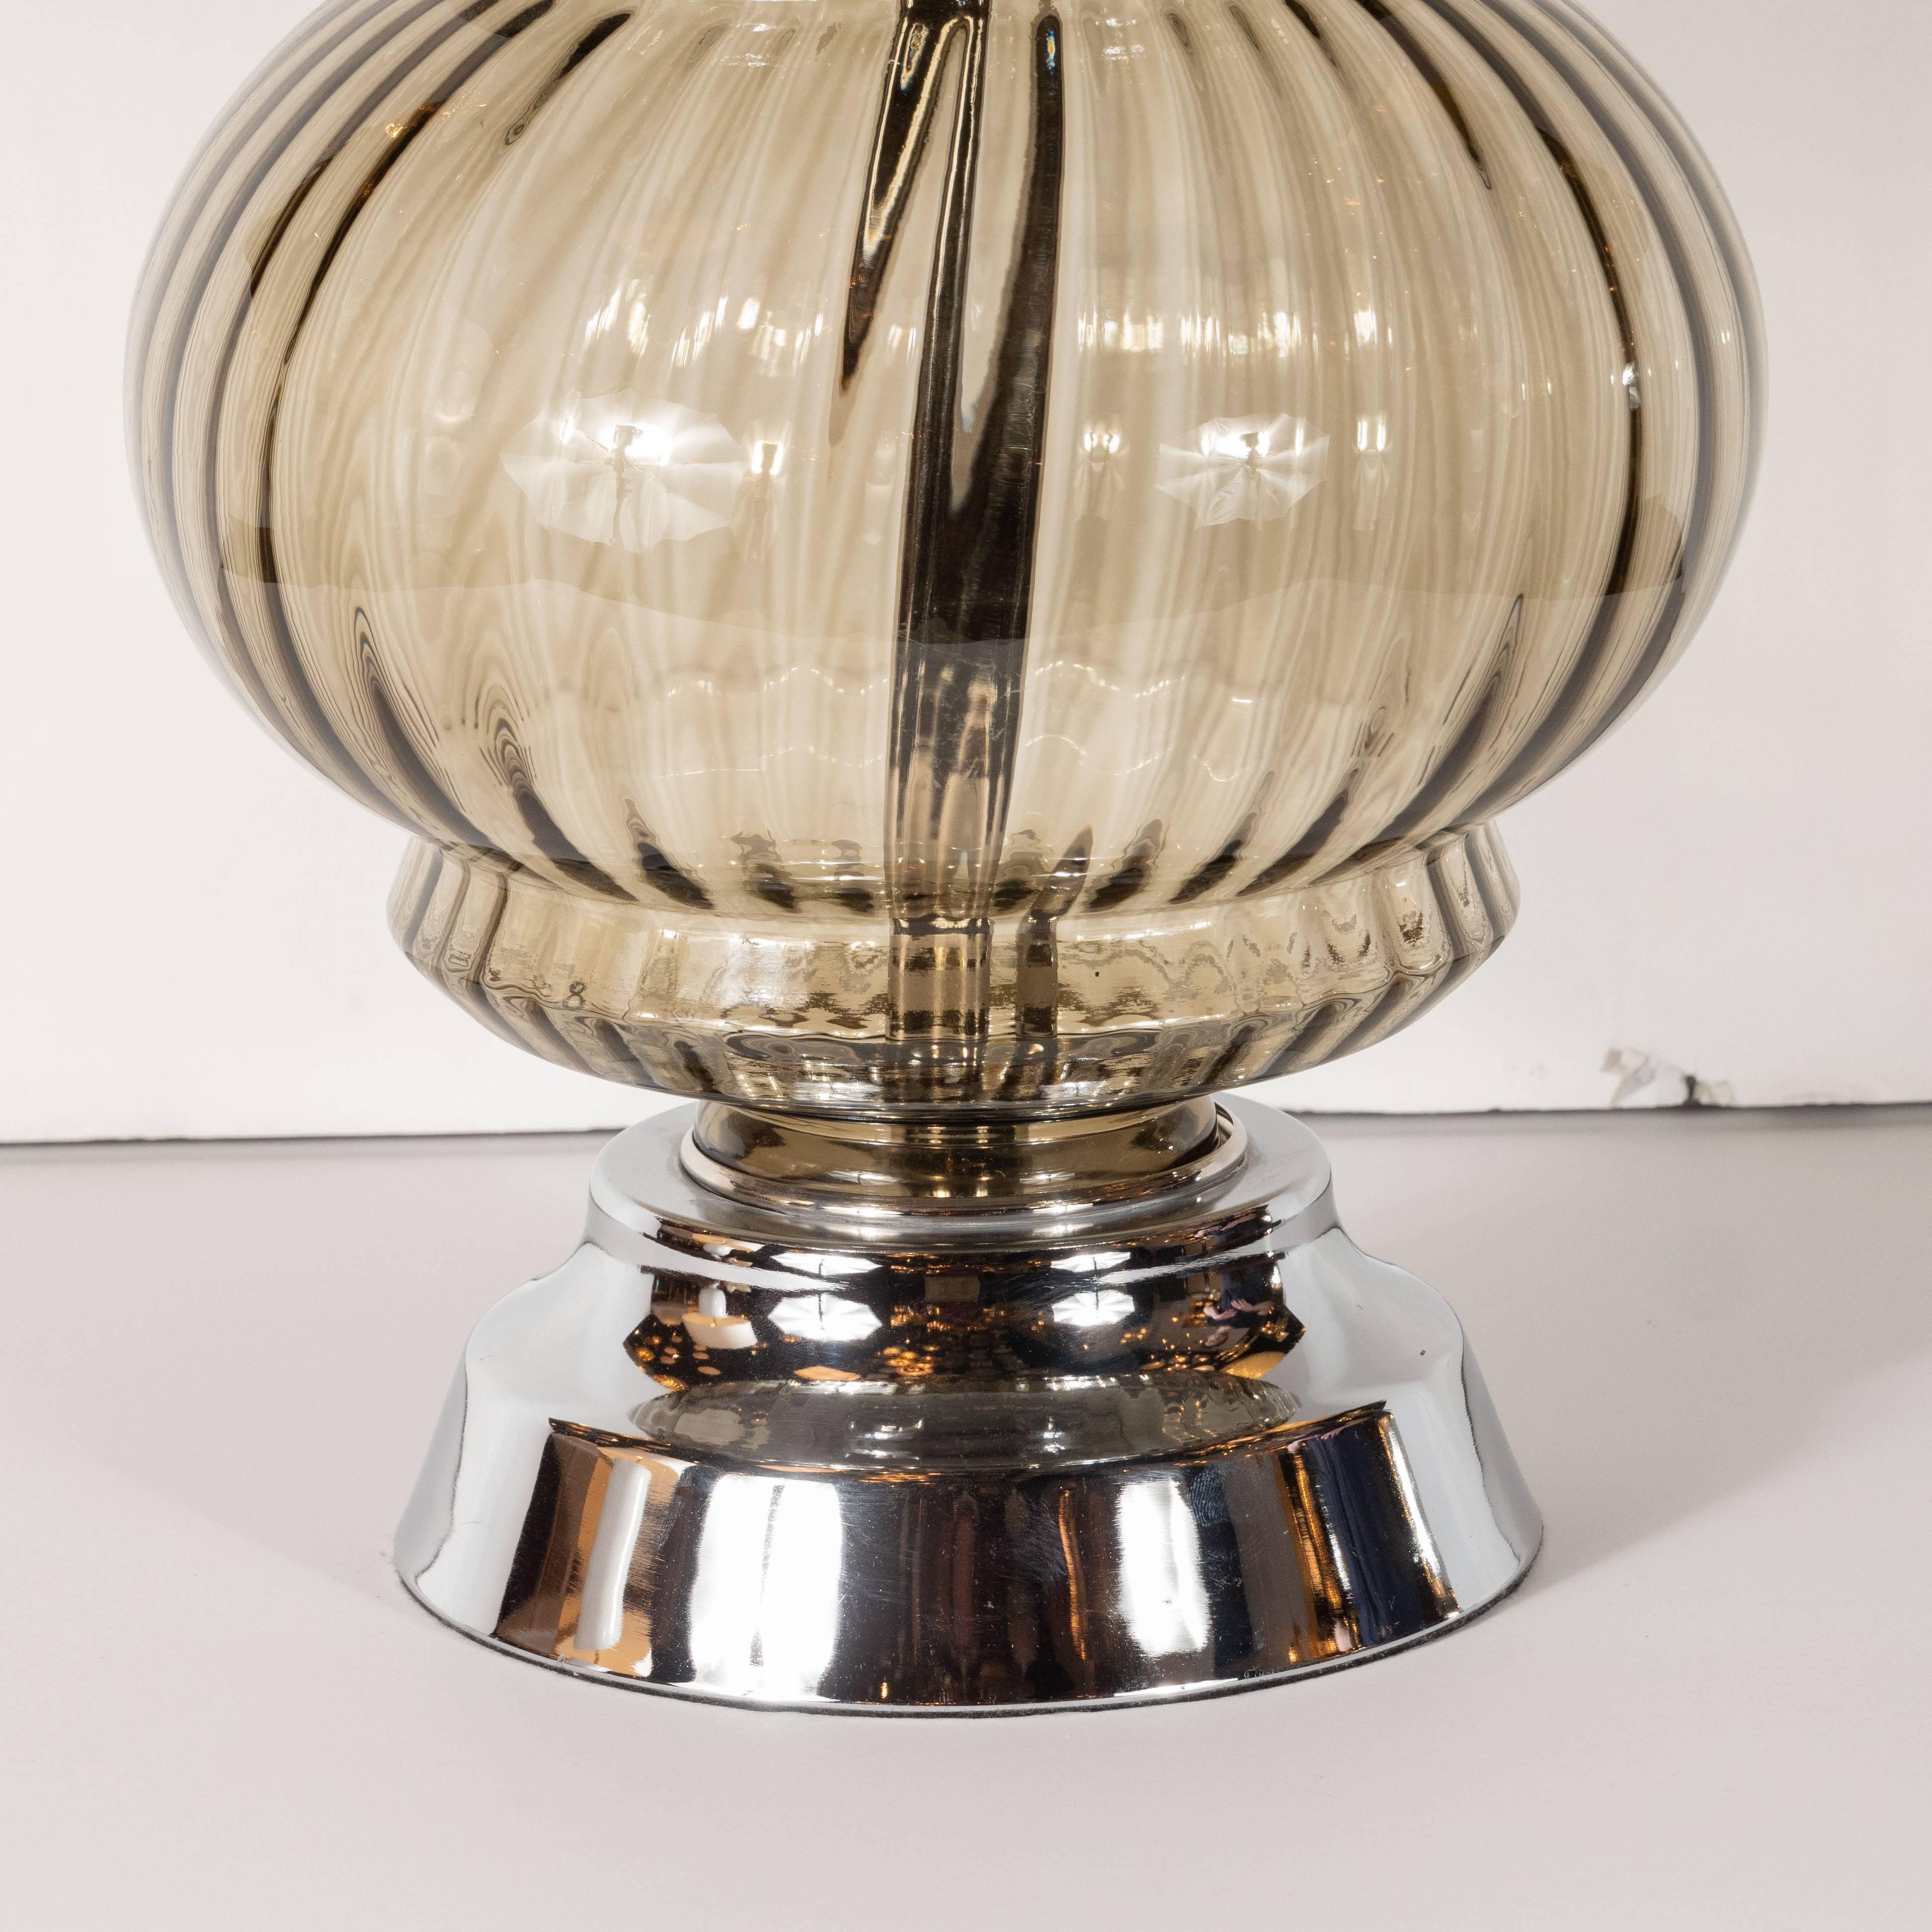 This elegant Mid-Century Modern table lamp was realized in the United States, circa 1960. It features a ribbed orbital glass body with a stepped indentation on top and bottom all in translucent smoked glass. The body sits on a gently sloped and